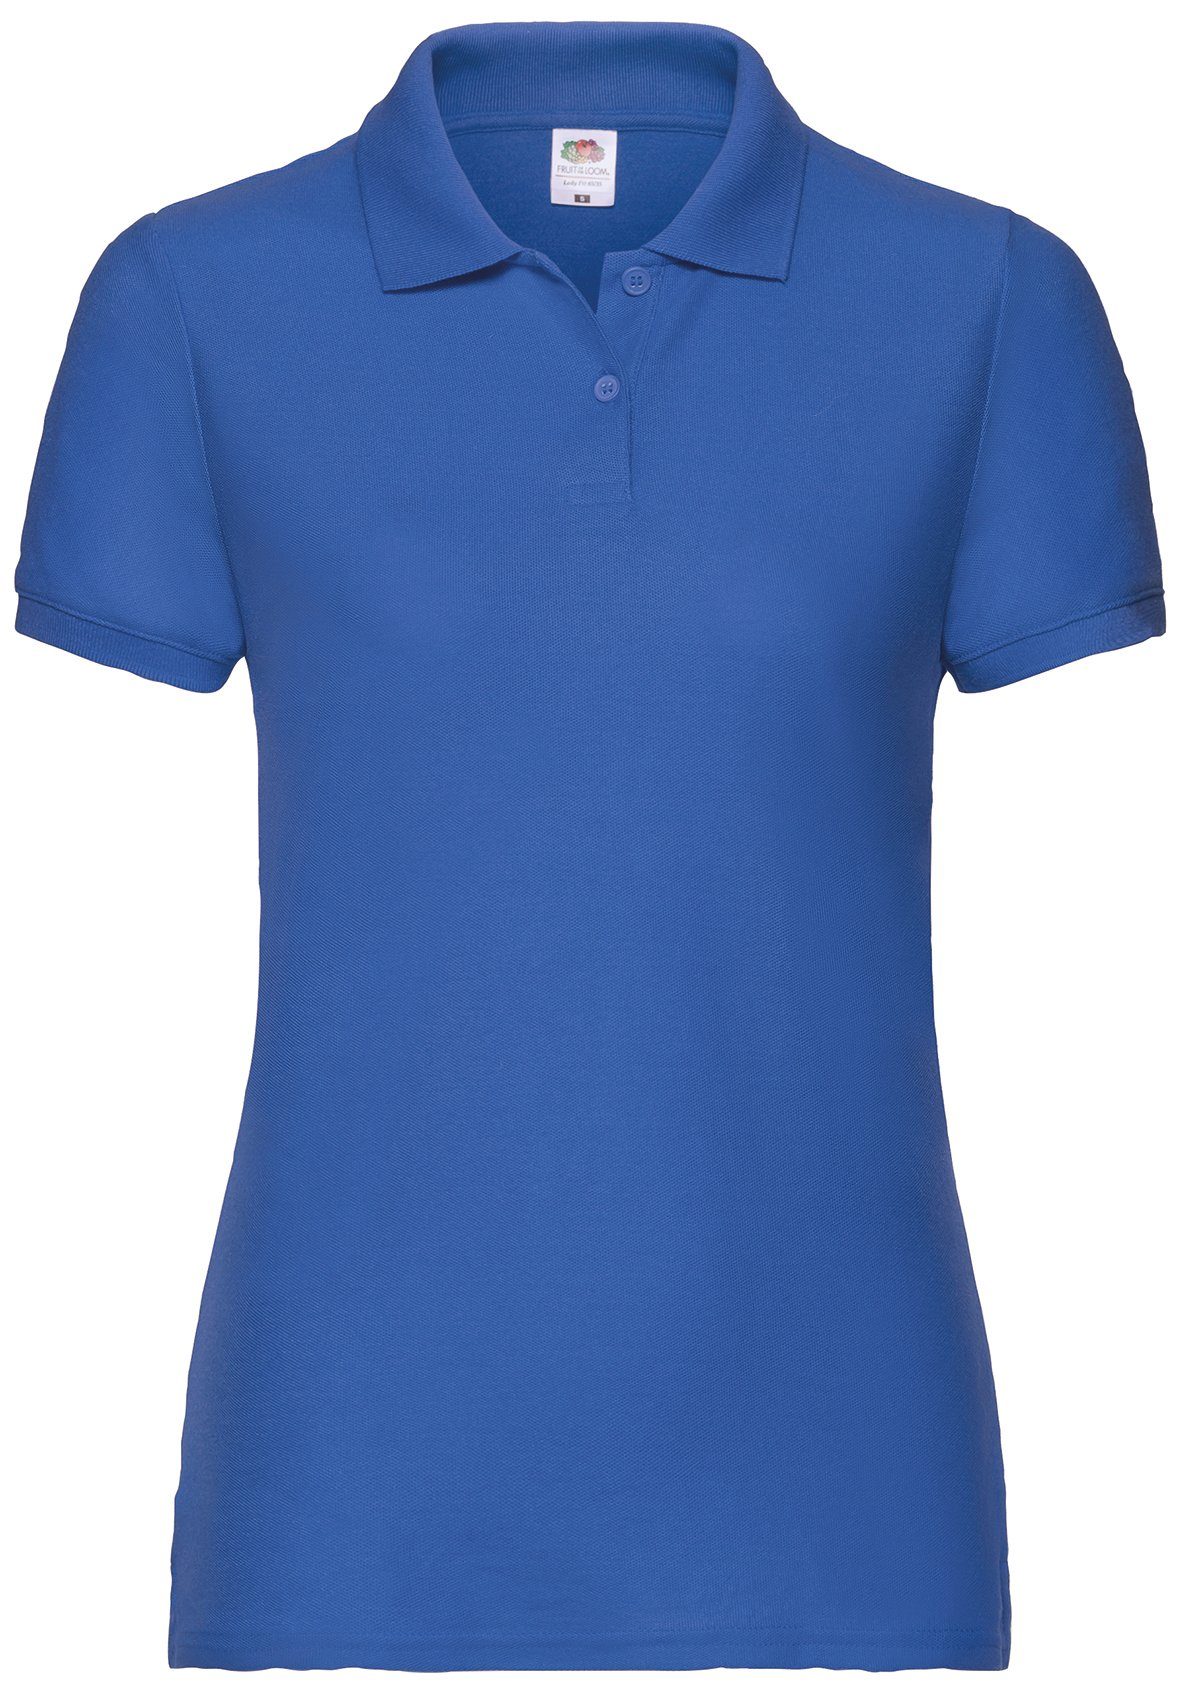 Fruit of the Loom Poloshirt Fruit of the Loom 65/35 Polo Lady-Fit royal